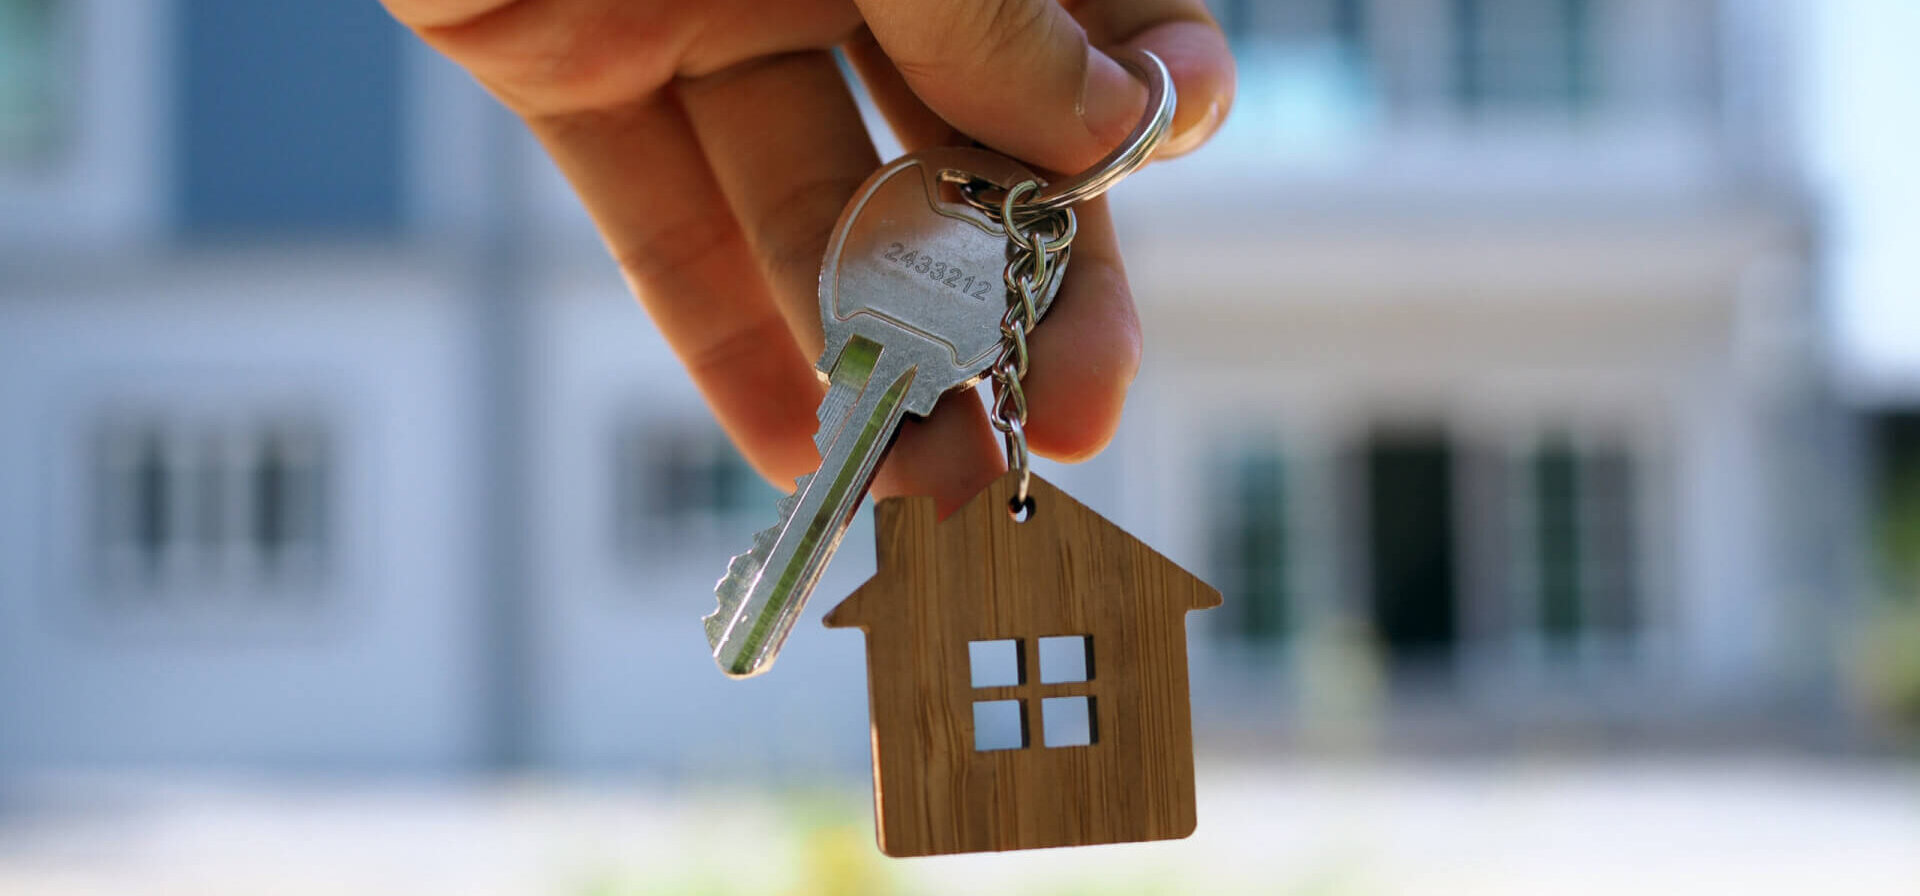 A hand holding a key and keychain in front of a house.